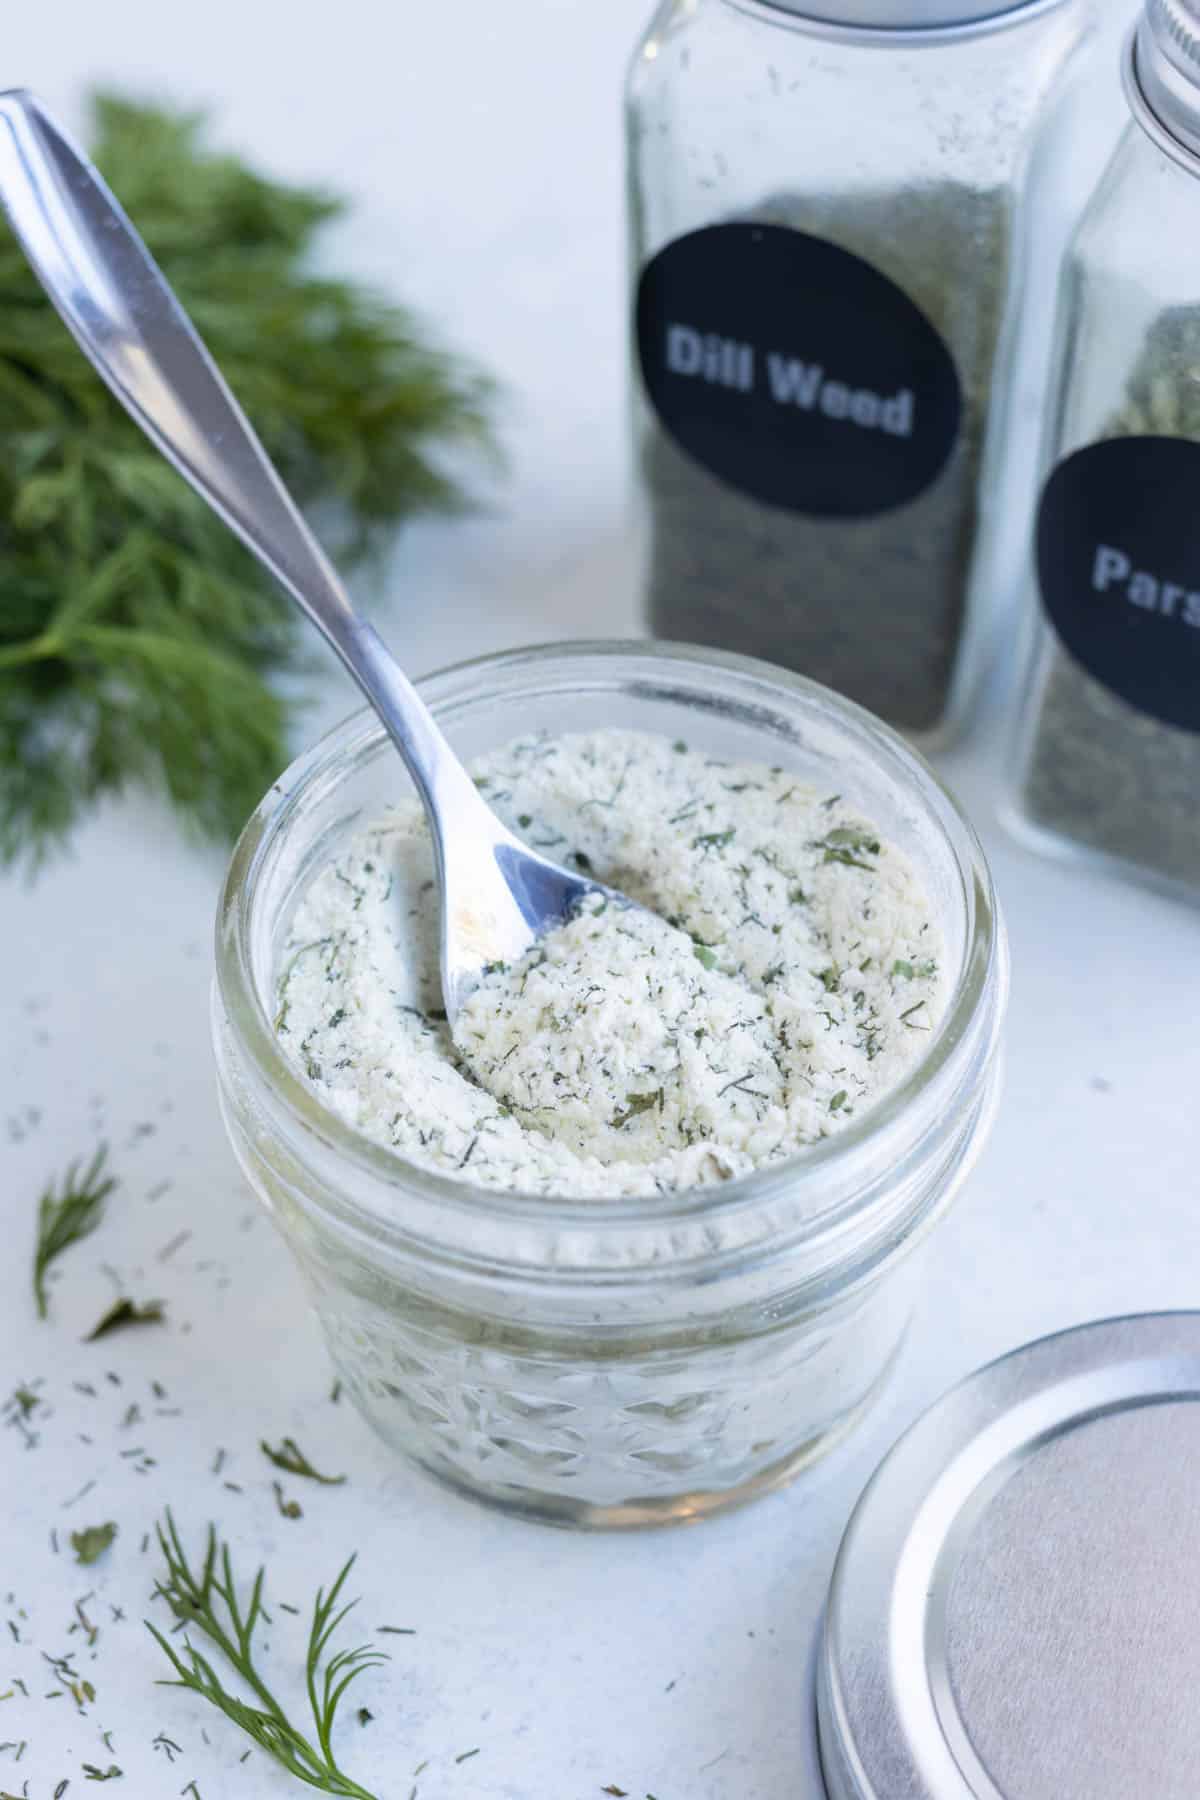 Ranch seasoning is stored in a small jar.